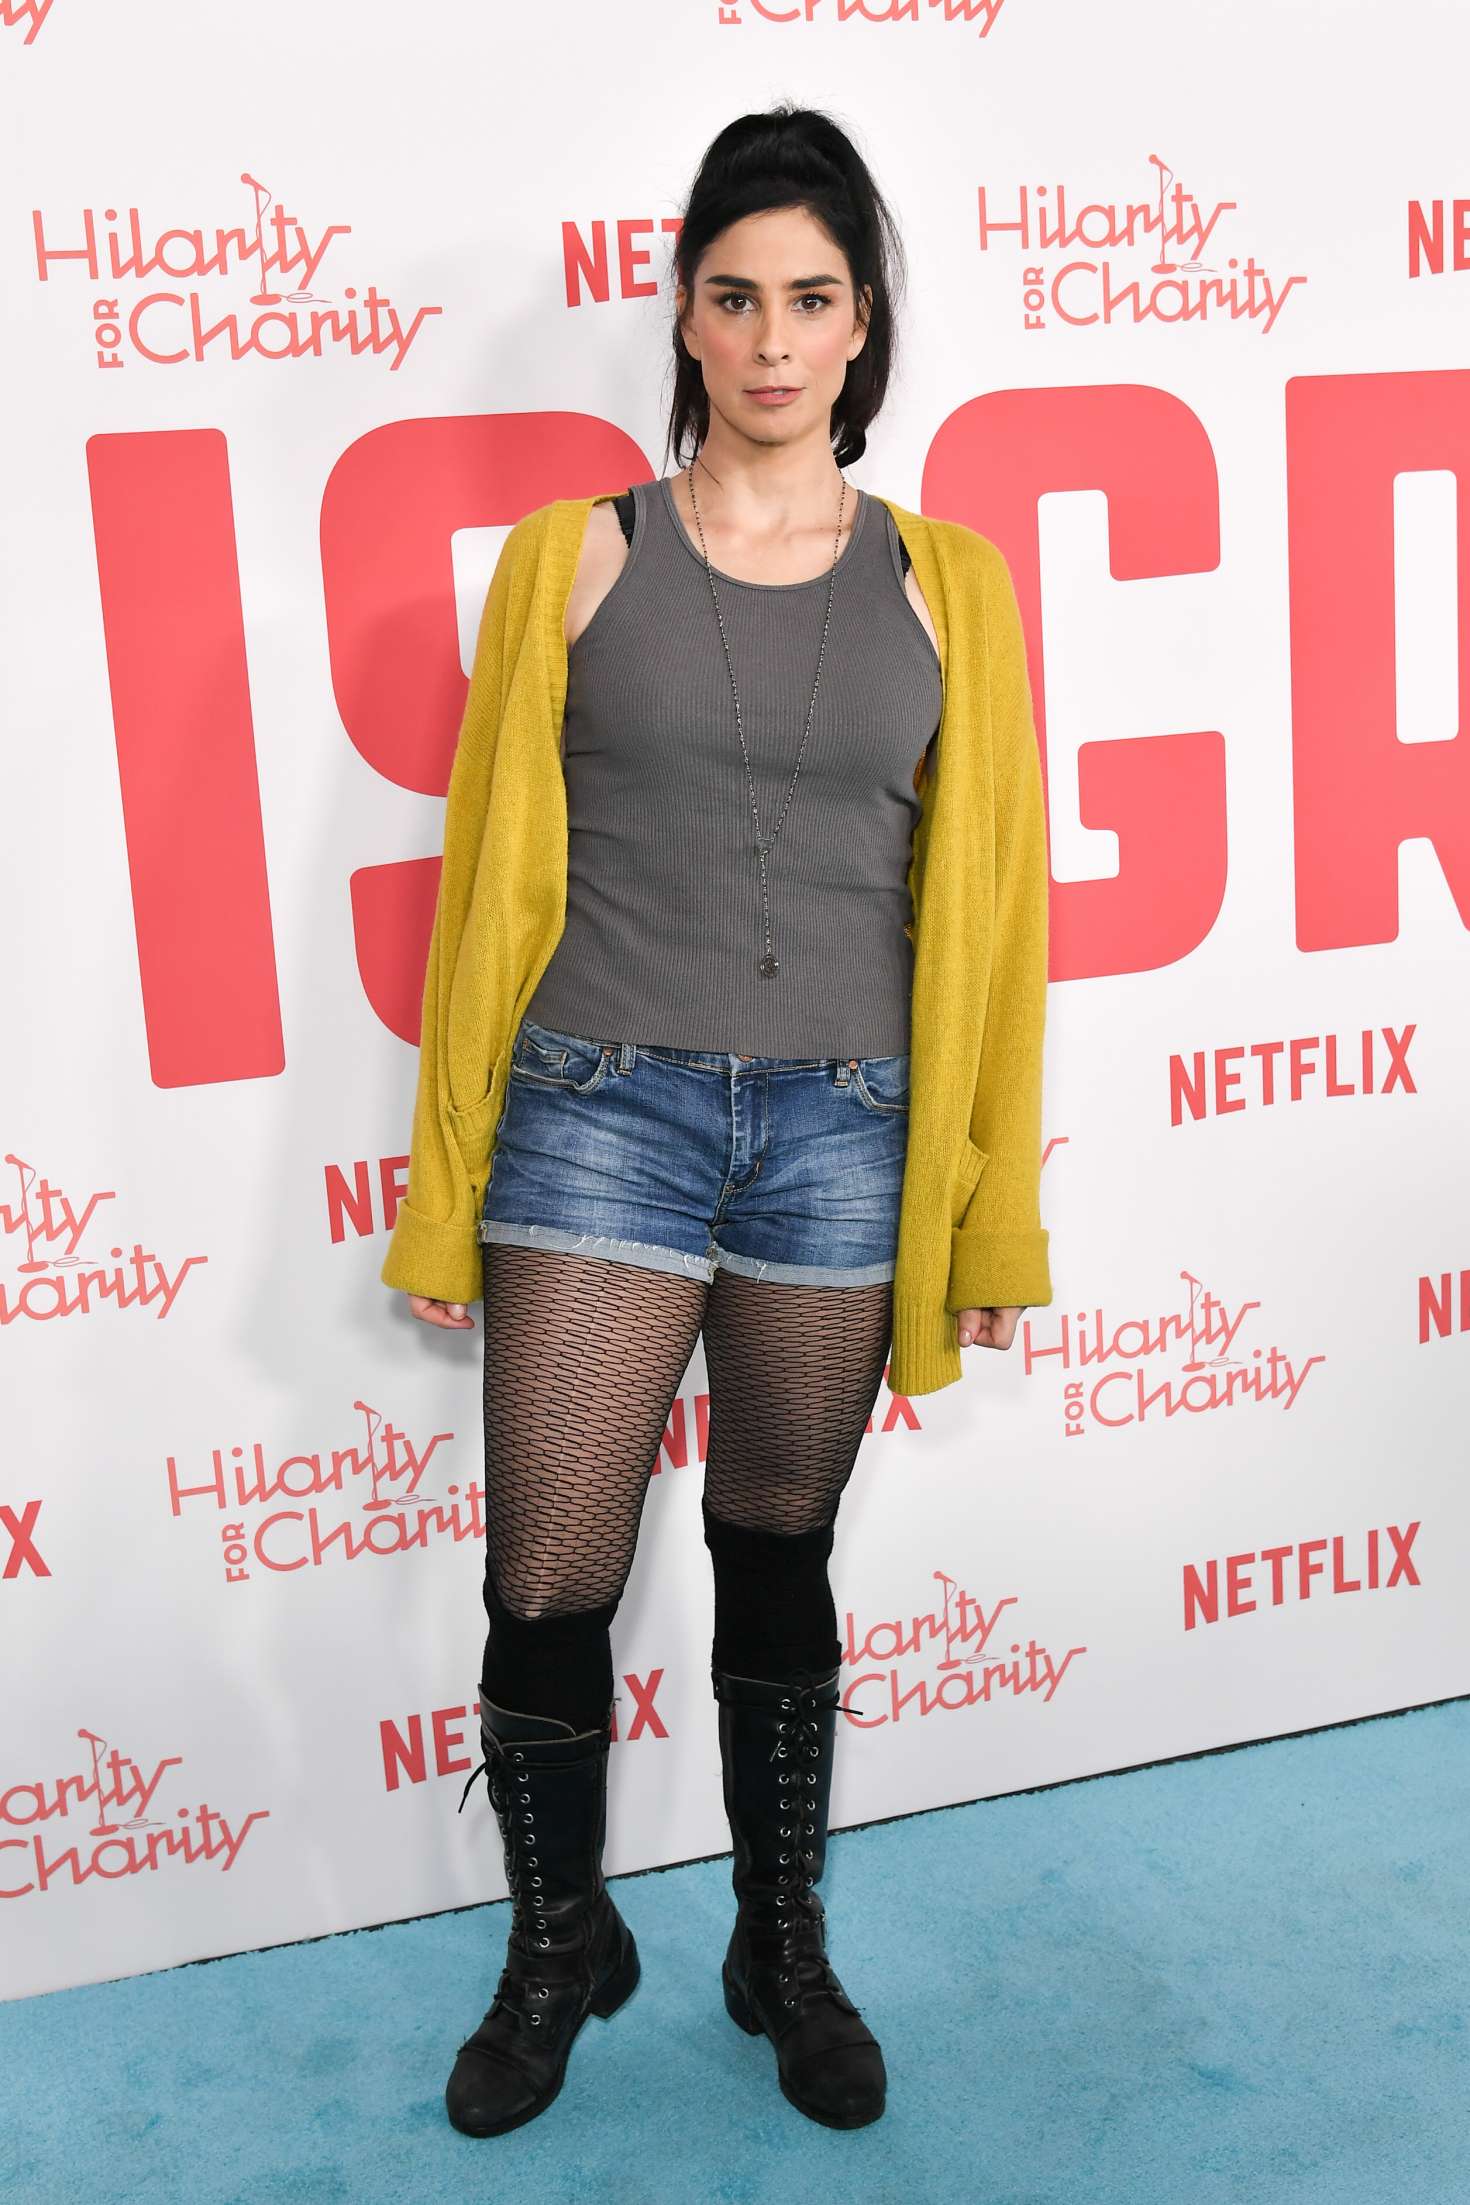 Sarah Silverman - 2018 Hilarity for Charity Variety Show in Los Angeles